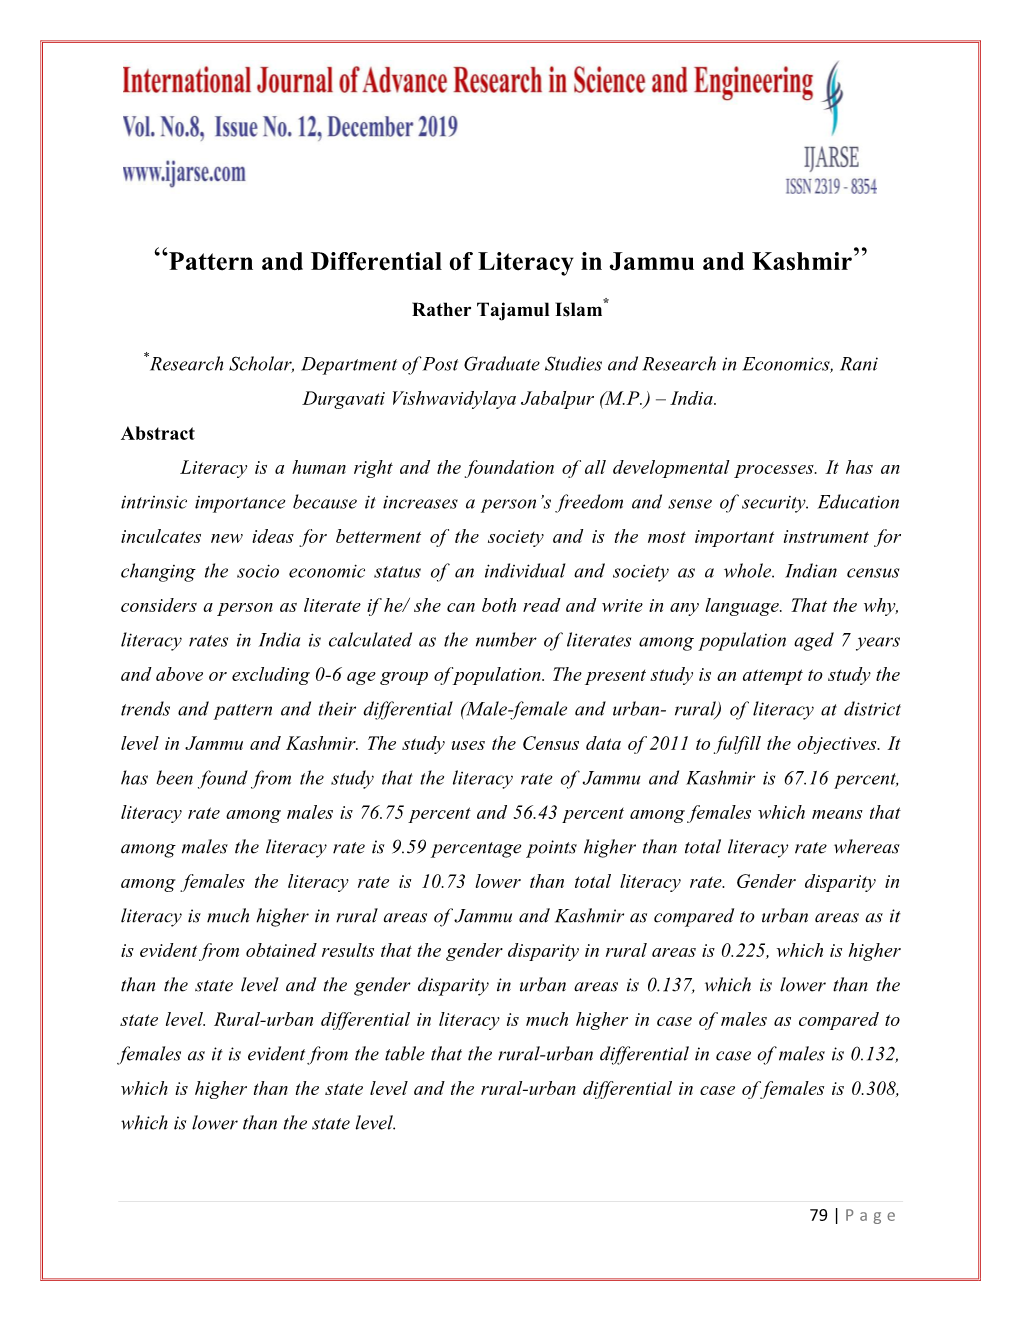 “Pattern and Differential of Literacy in Jammu and Kashmir”